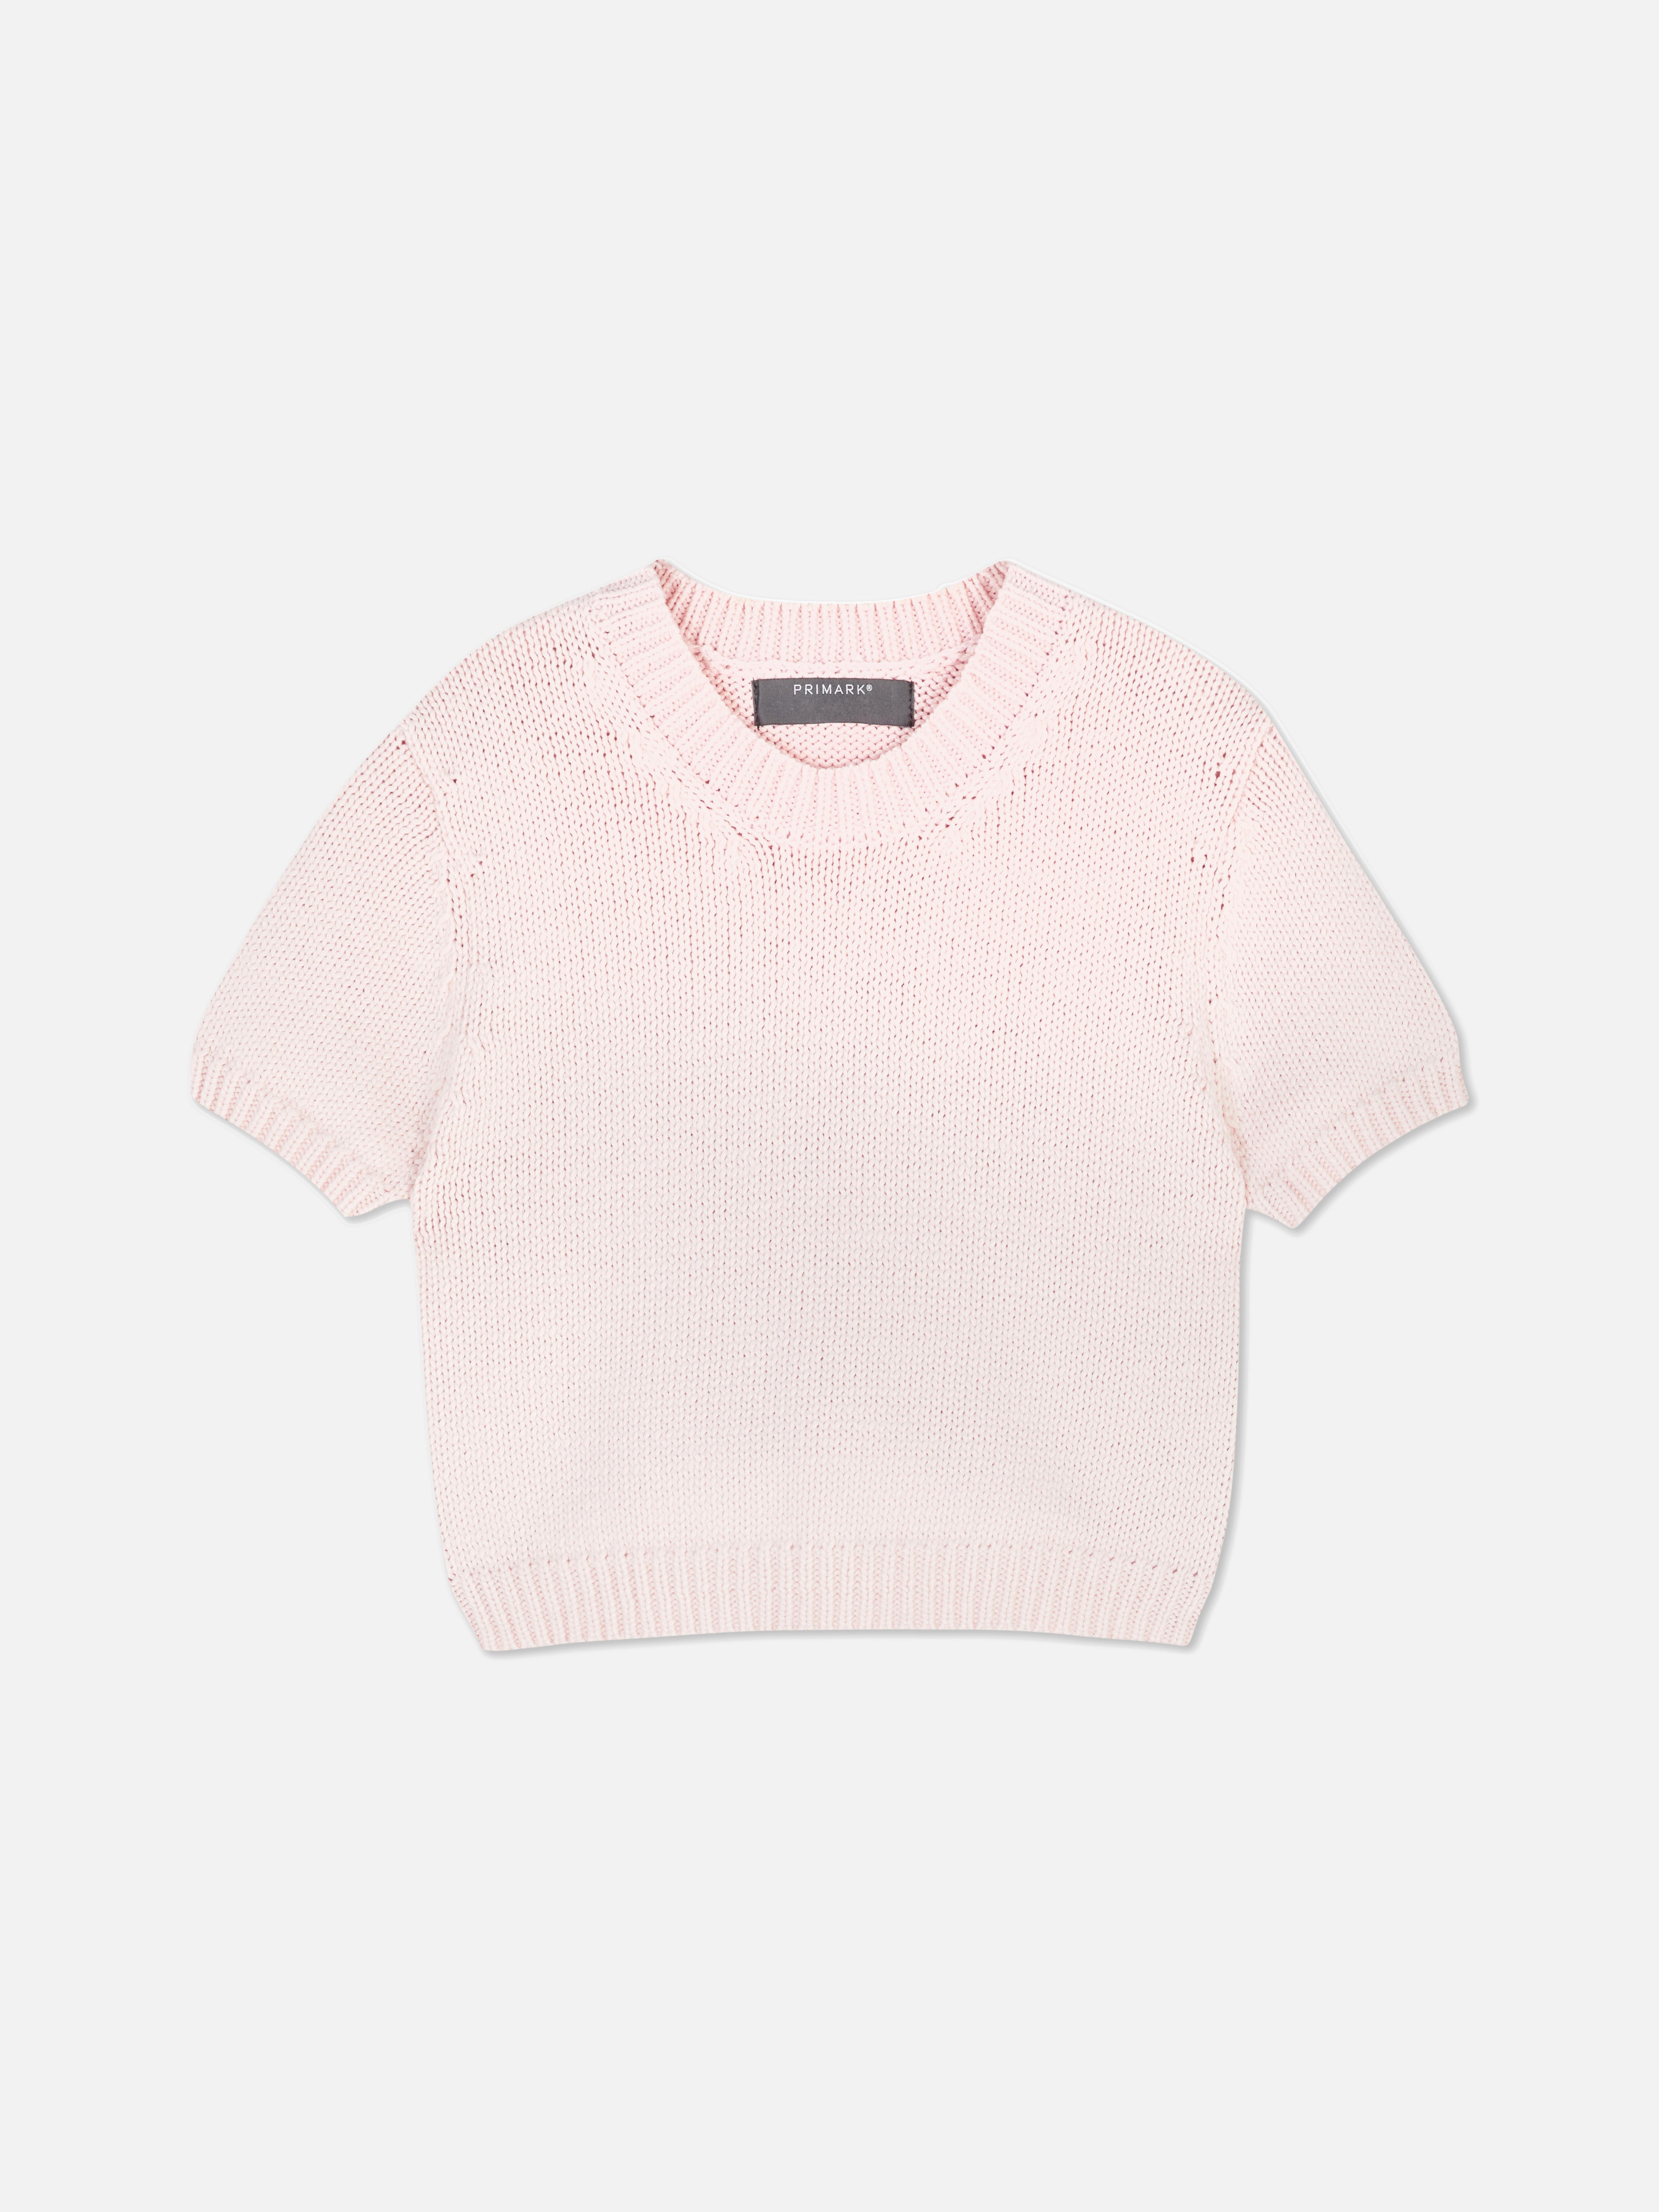 Womens Pink Short Sleeve Knitted Top